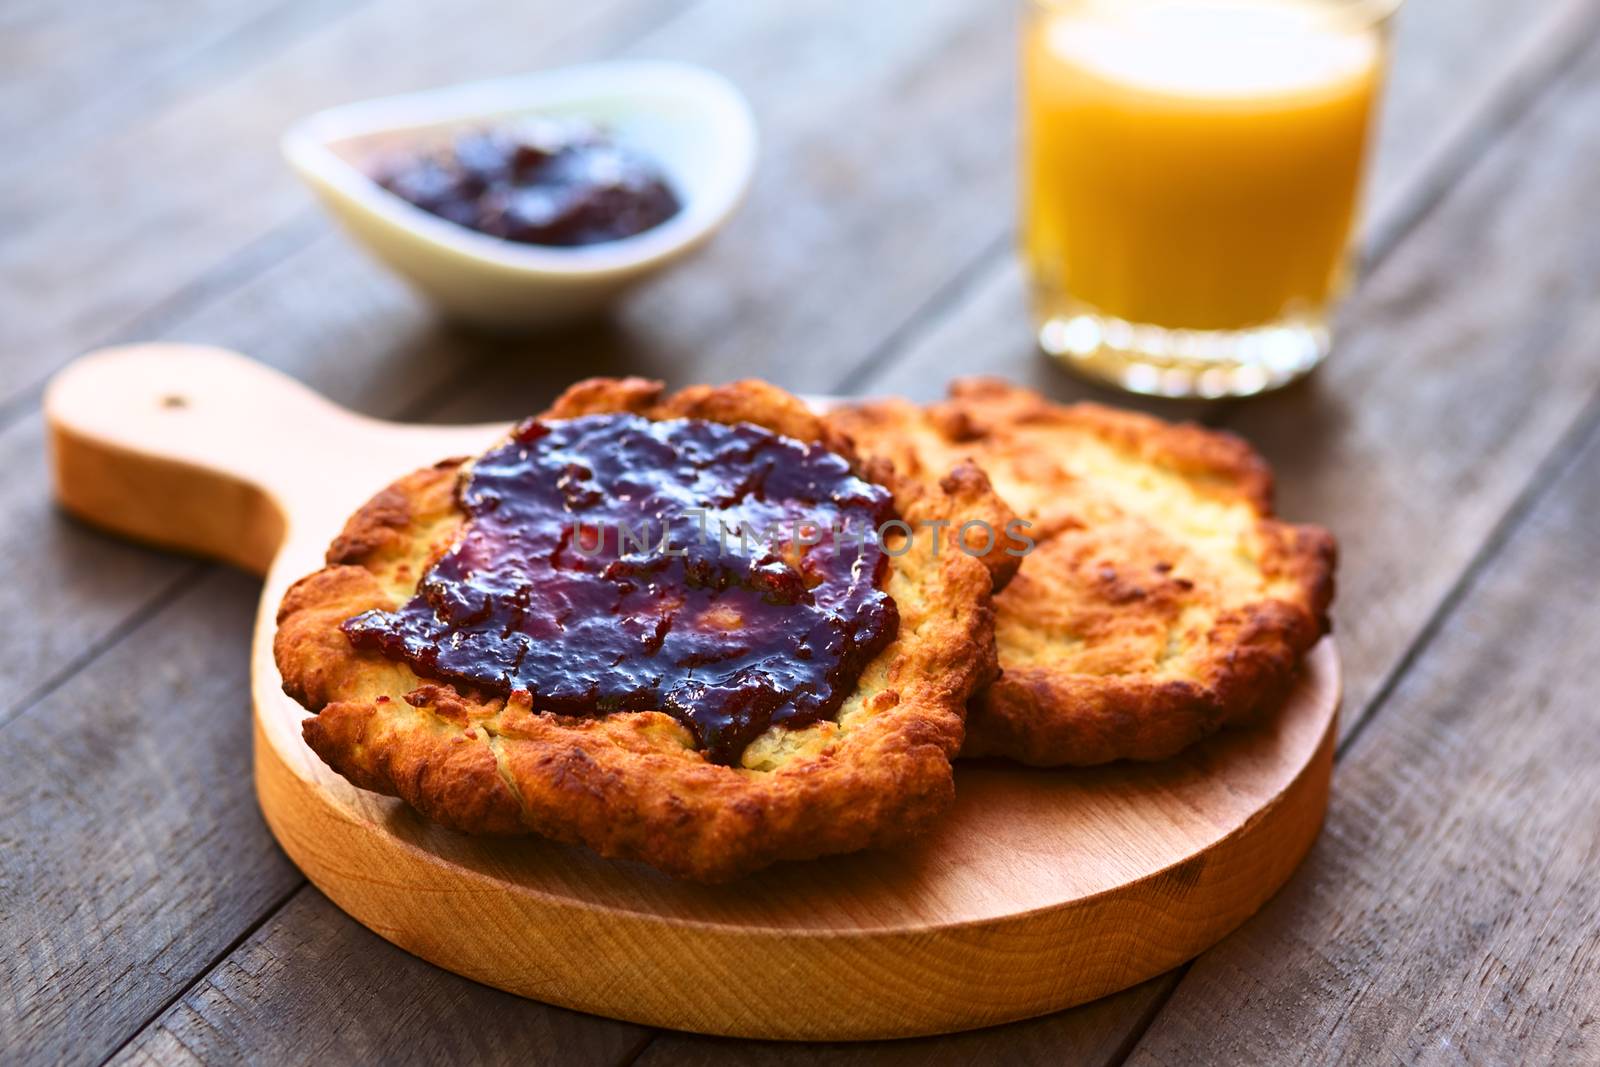 Freshly prepared traditional Hungarian deep fried flat bread called Langos made of a yeast dough, with jam spread on top  (Selective Focus, Focus on the front of the jam on the langos) 

 